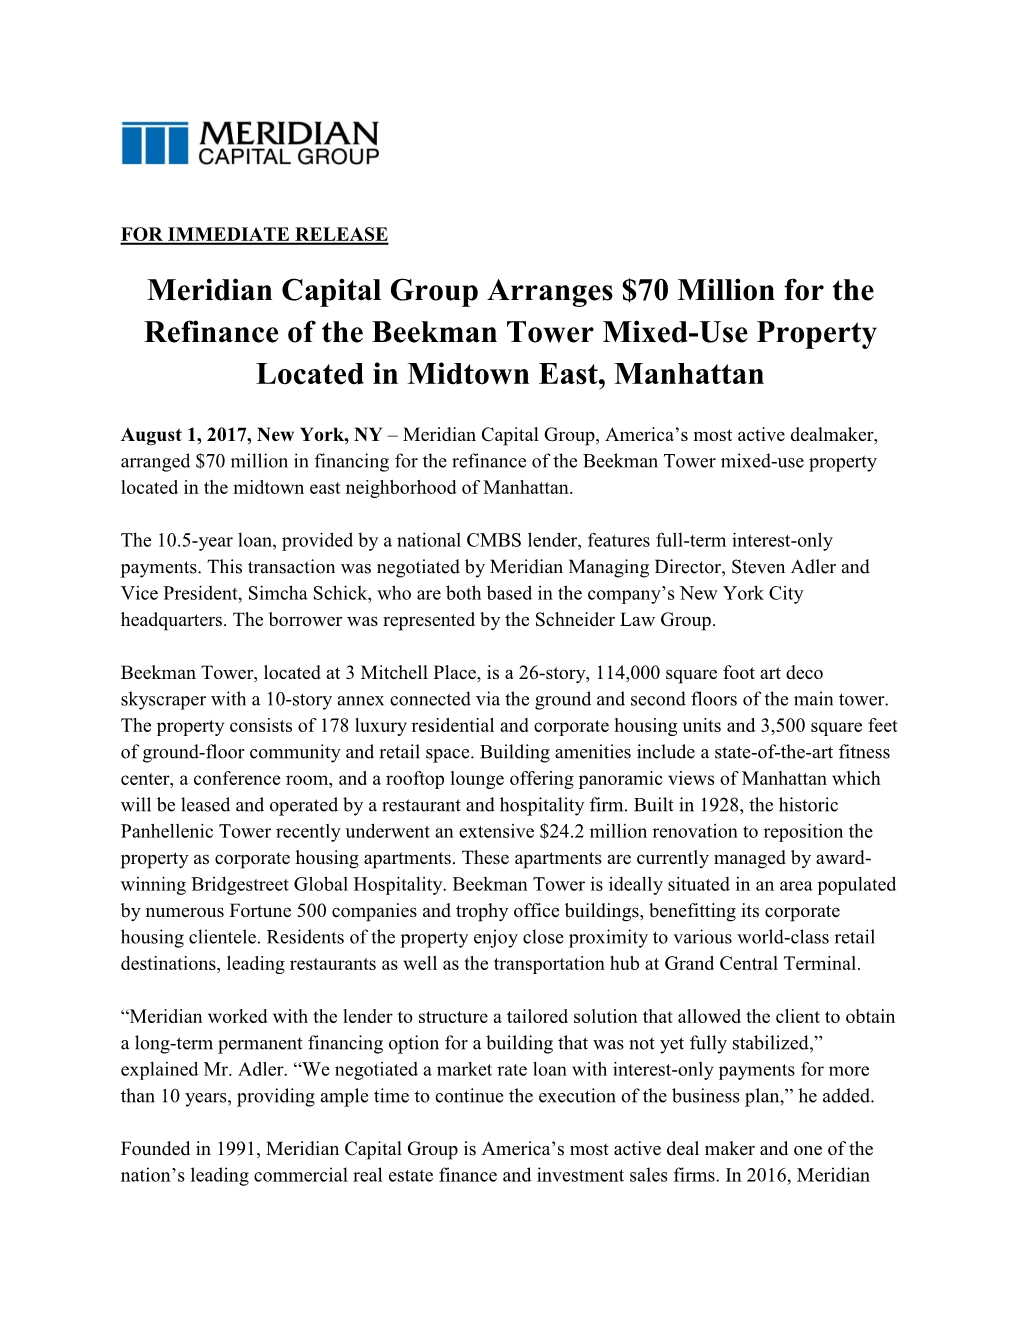 Meridian Capital Group Arranges $70 Million for the Refinance of the Beekman Tower Mixed-Use Property Located in Midtown East, Manhattan